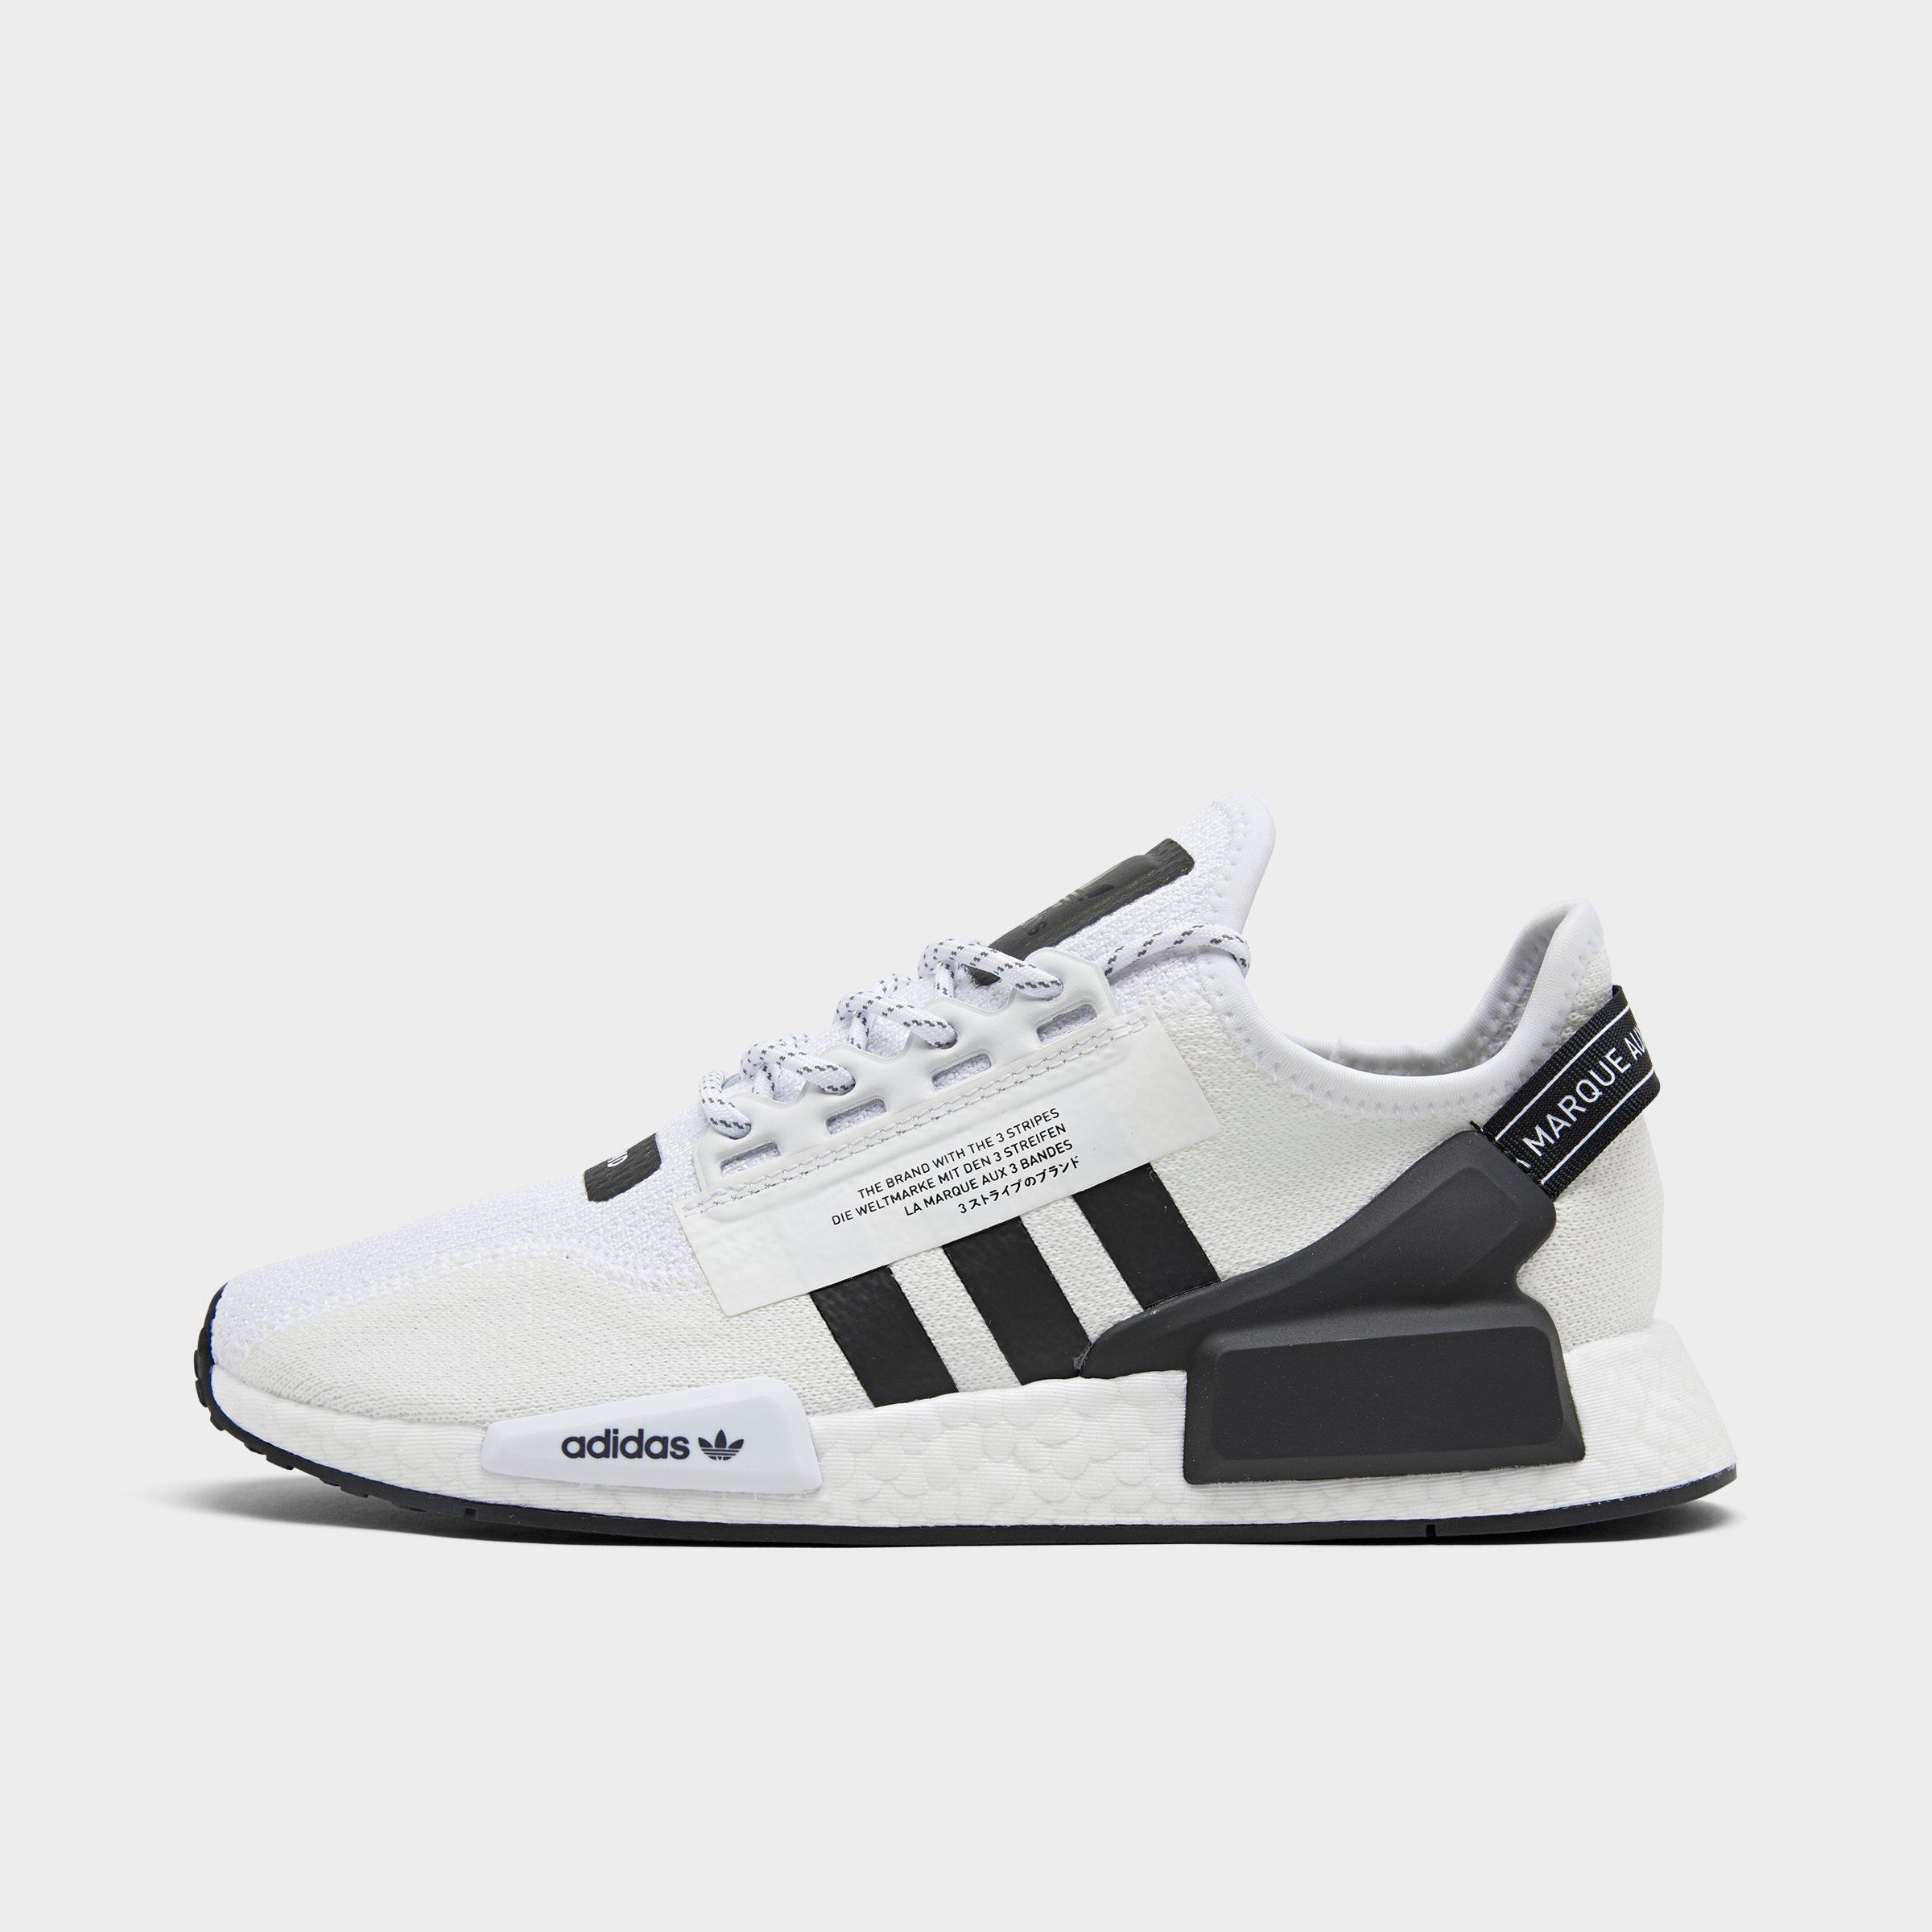 Adidas nmd r1 j s80207 ab 11700 sneakers123